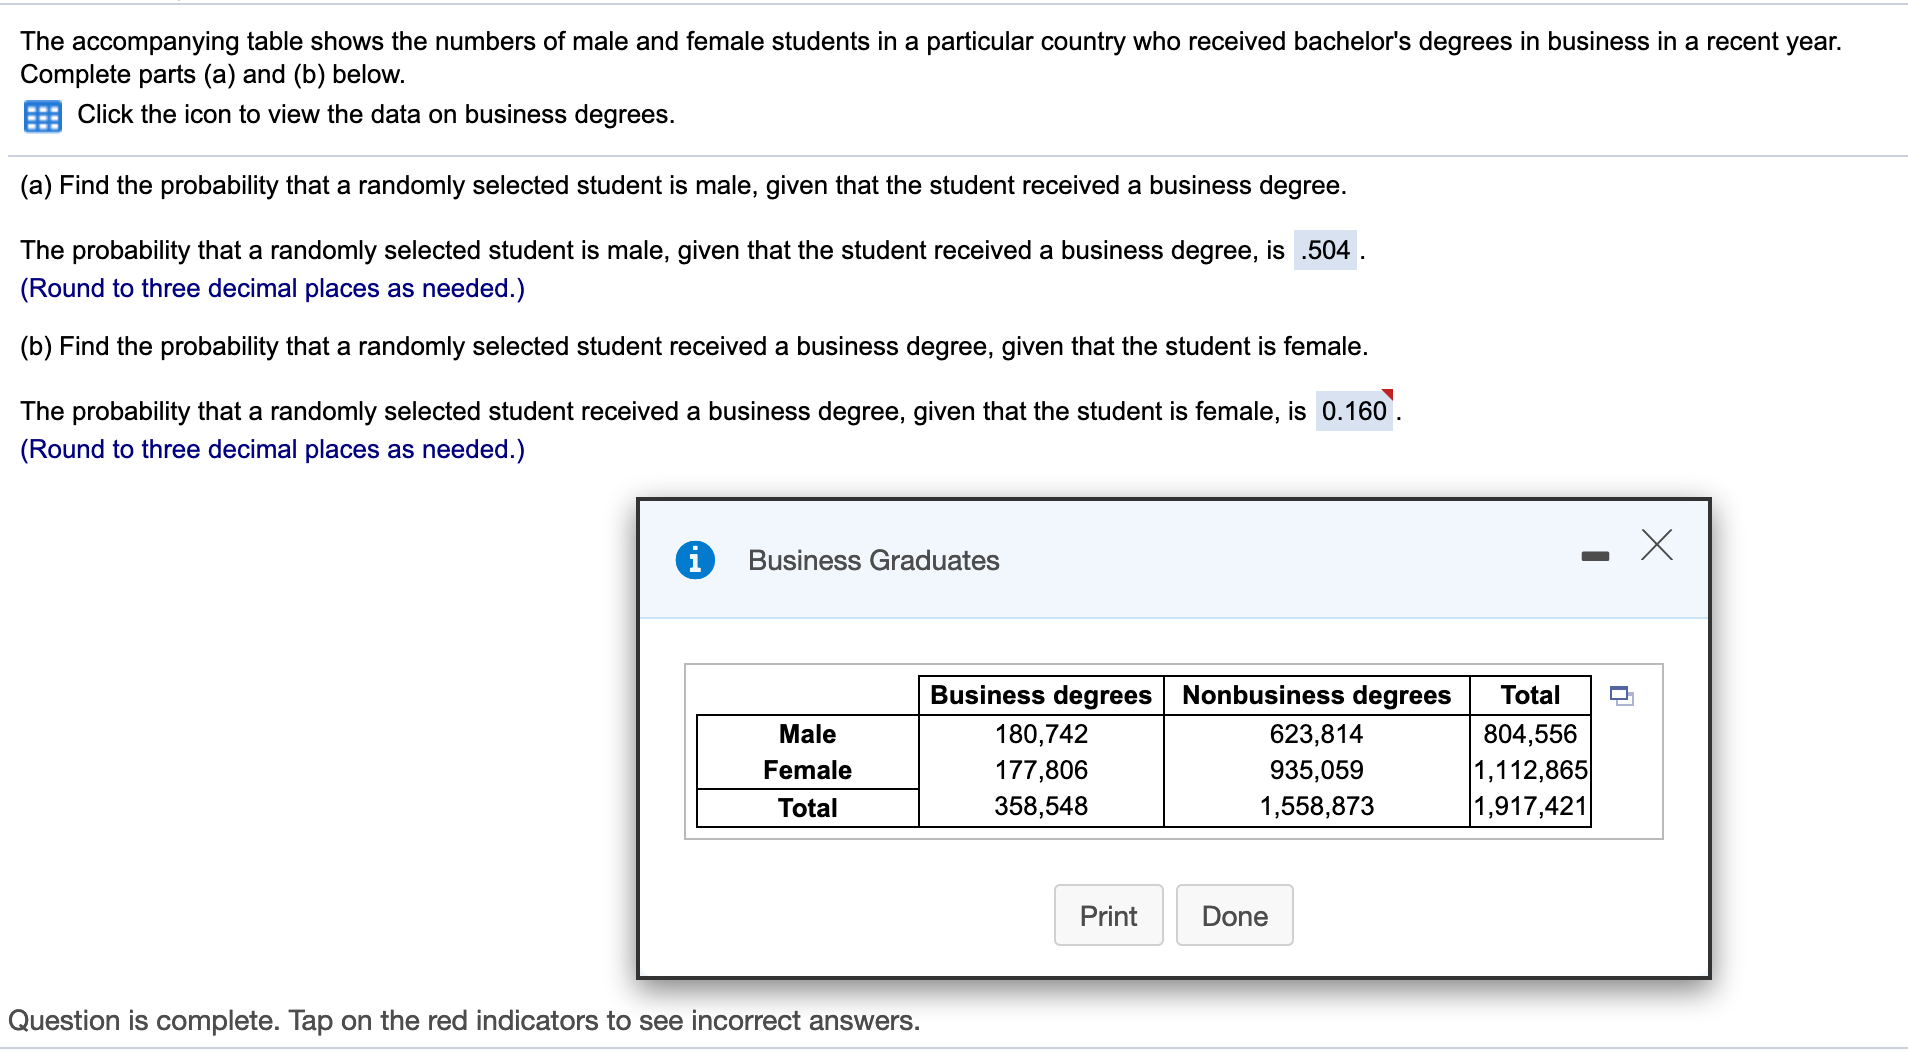 The accompanying table shows the numbers of male and female students in a
Complete parts (a) and (b) below
Click the icon to view the data on business degrees.
particular country who received bachelor's degrees in business in a recent year.
(a) Find the probability that a randomly selected student is male, given that the student received a business degree.
The probability that a randomly selected student is male, given that the student received a business degree, is .504
(Round to three decimal places as needed.)
(b) Find the probability that a randomly selected student received a business degree, given that the student is female.
The probability that a randomly selected student received a business degree, given that the student is female, is 0.160.
(Round to three decimal places as needed.)
i
Business Graduates
Business degrees
Nonbusiness degrees
Total
180,742
Male
623,814
804,556
1,112,865
1,917,421
177,806
Female
935,059
1,558,873
358,548
Total
Print
Done
Question is complete. Tap on the red indicators to see incorrect answers.
I
